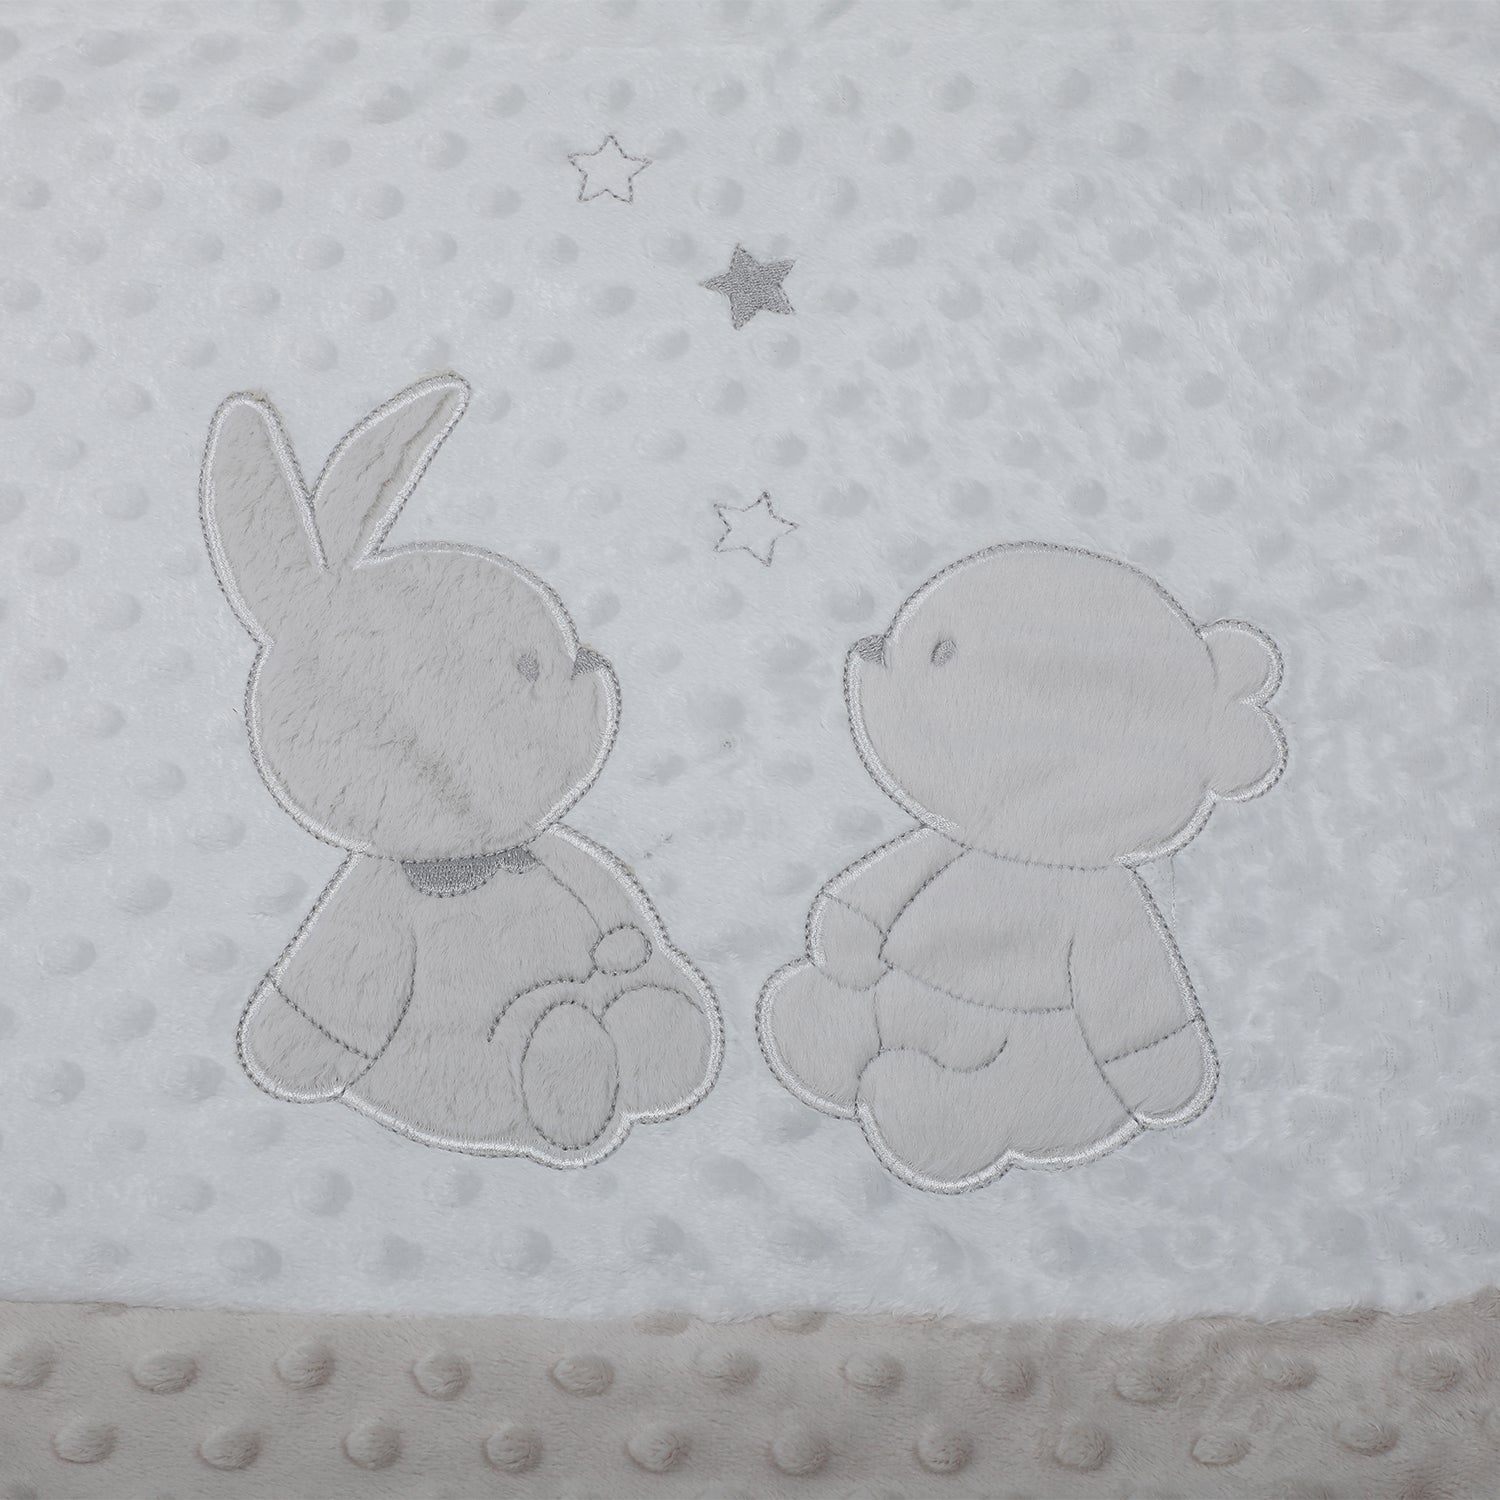 Baby Moo Best Friends Snuggly Bubble Blanket - Grey - Baby Moo